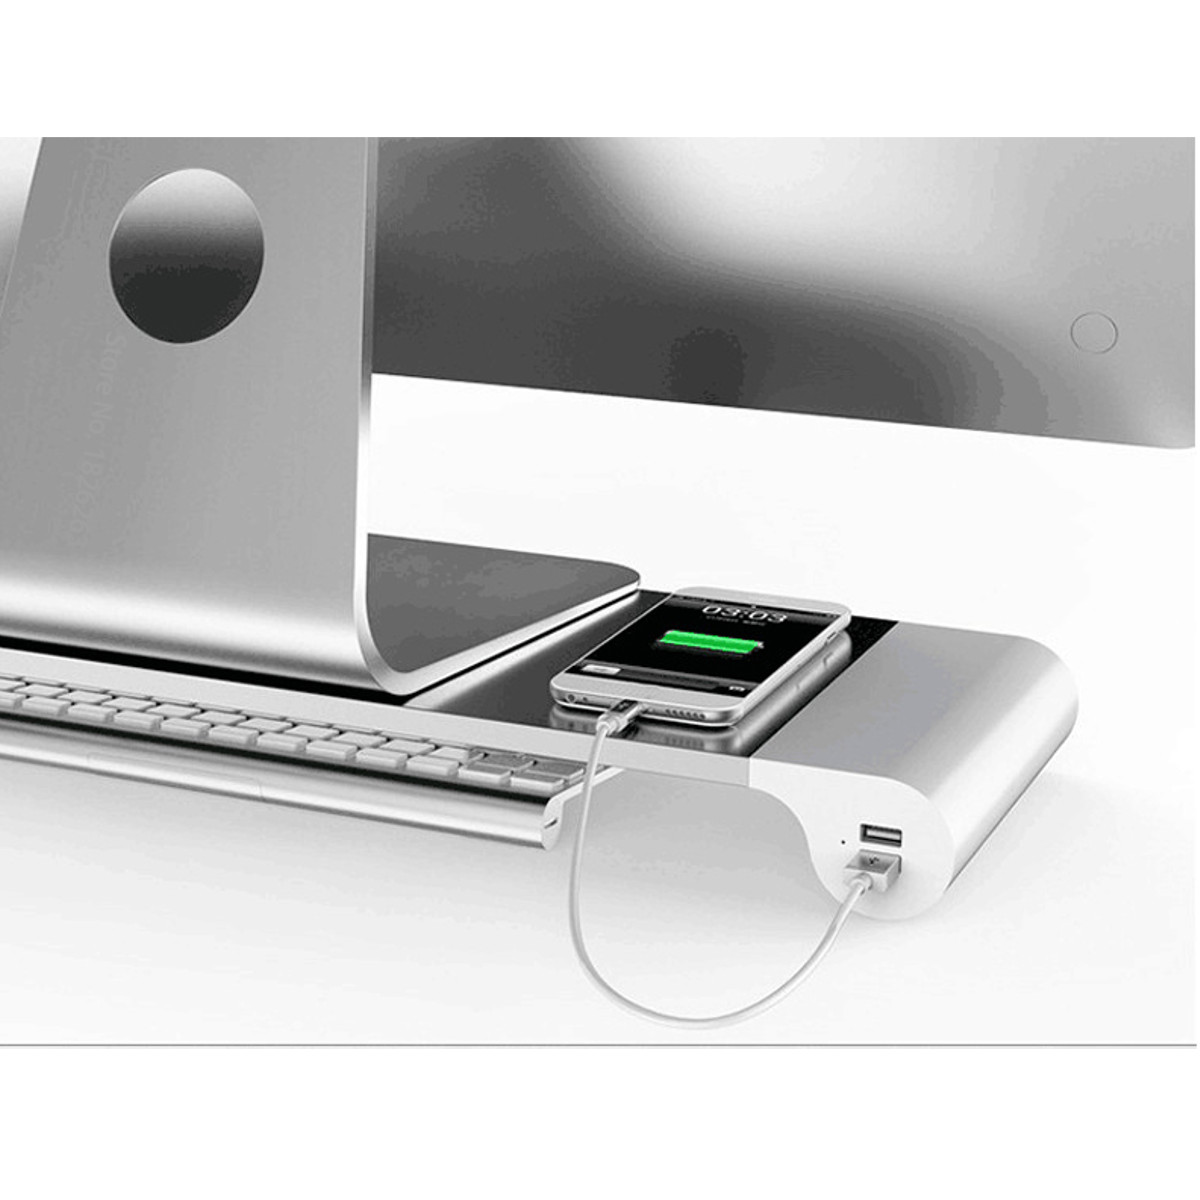 Aluminum-Desktop-Monitor-Stand-Non-slip-Notebook-Laptop-Riser-with-4-ports-USB-charger-for-iMac-MacB-1639044-8